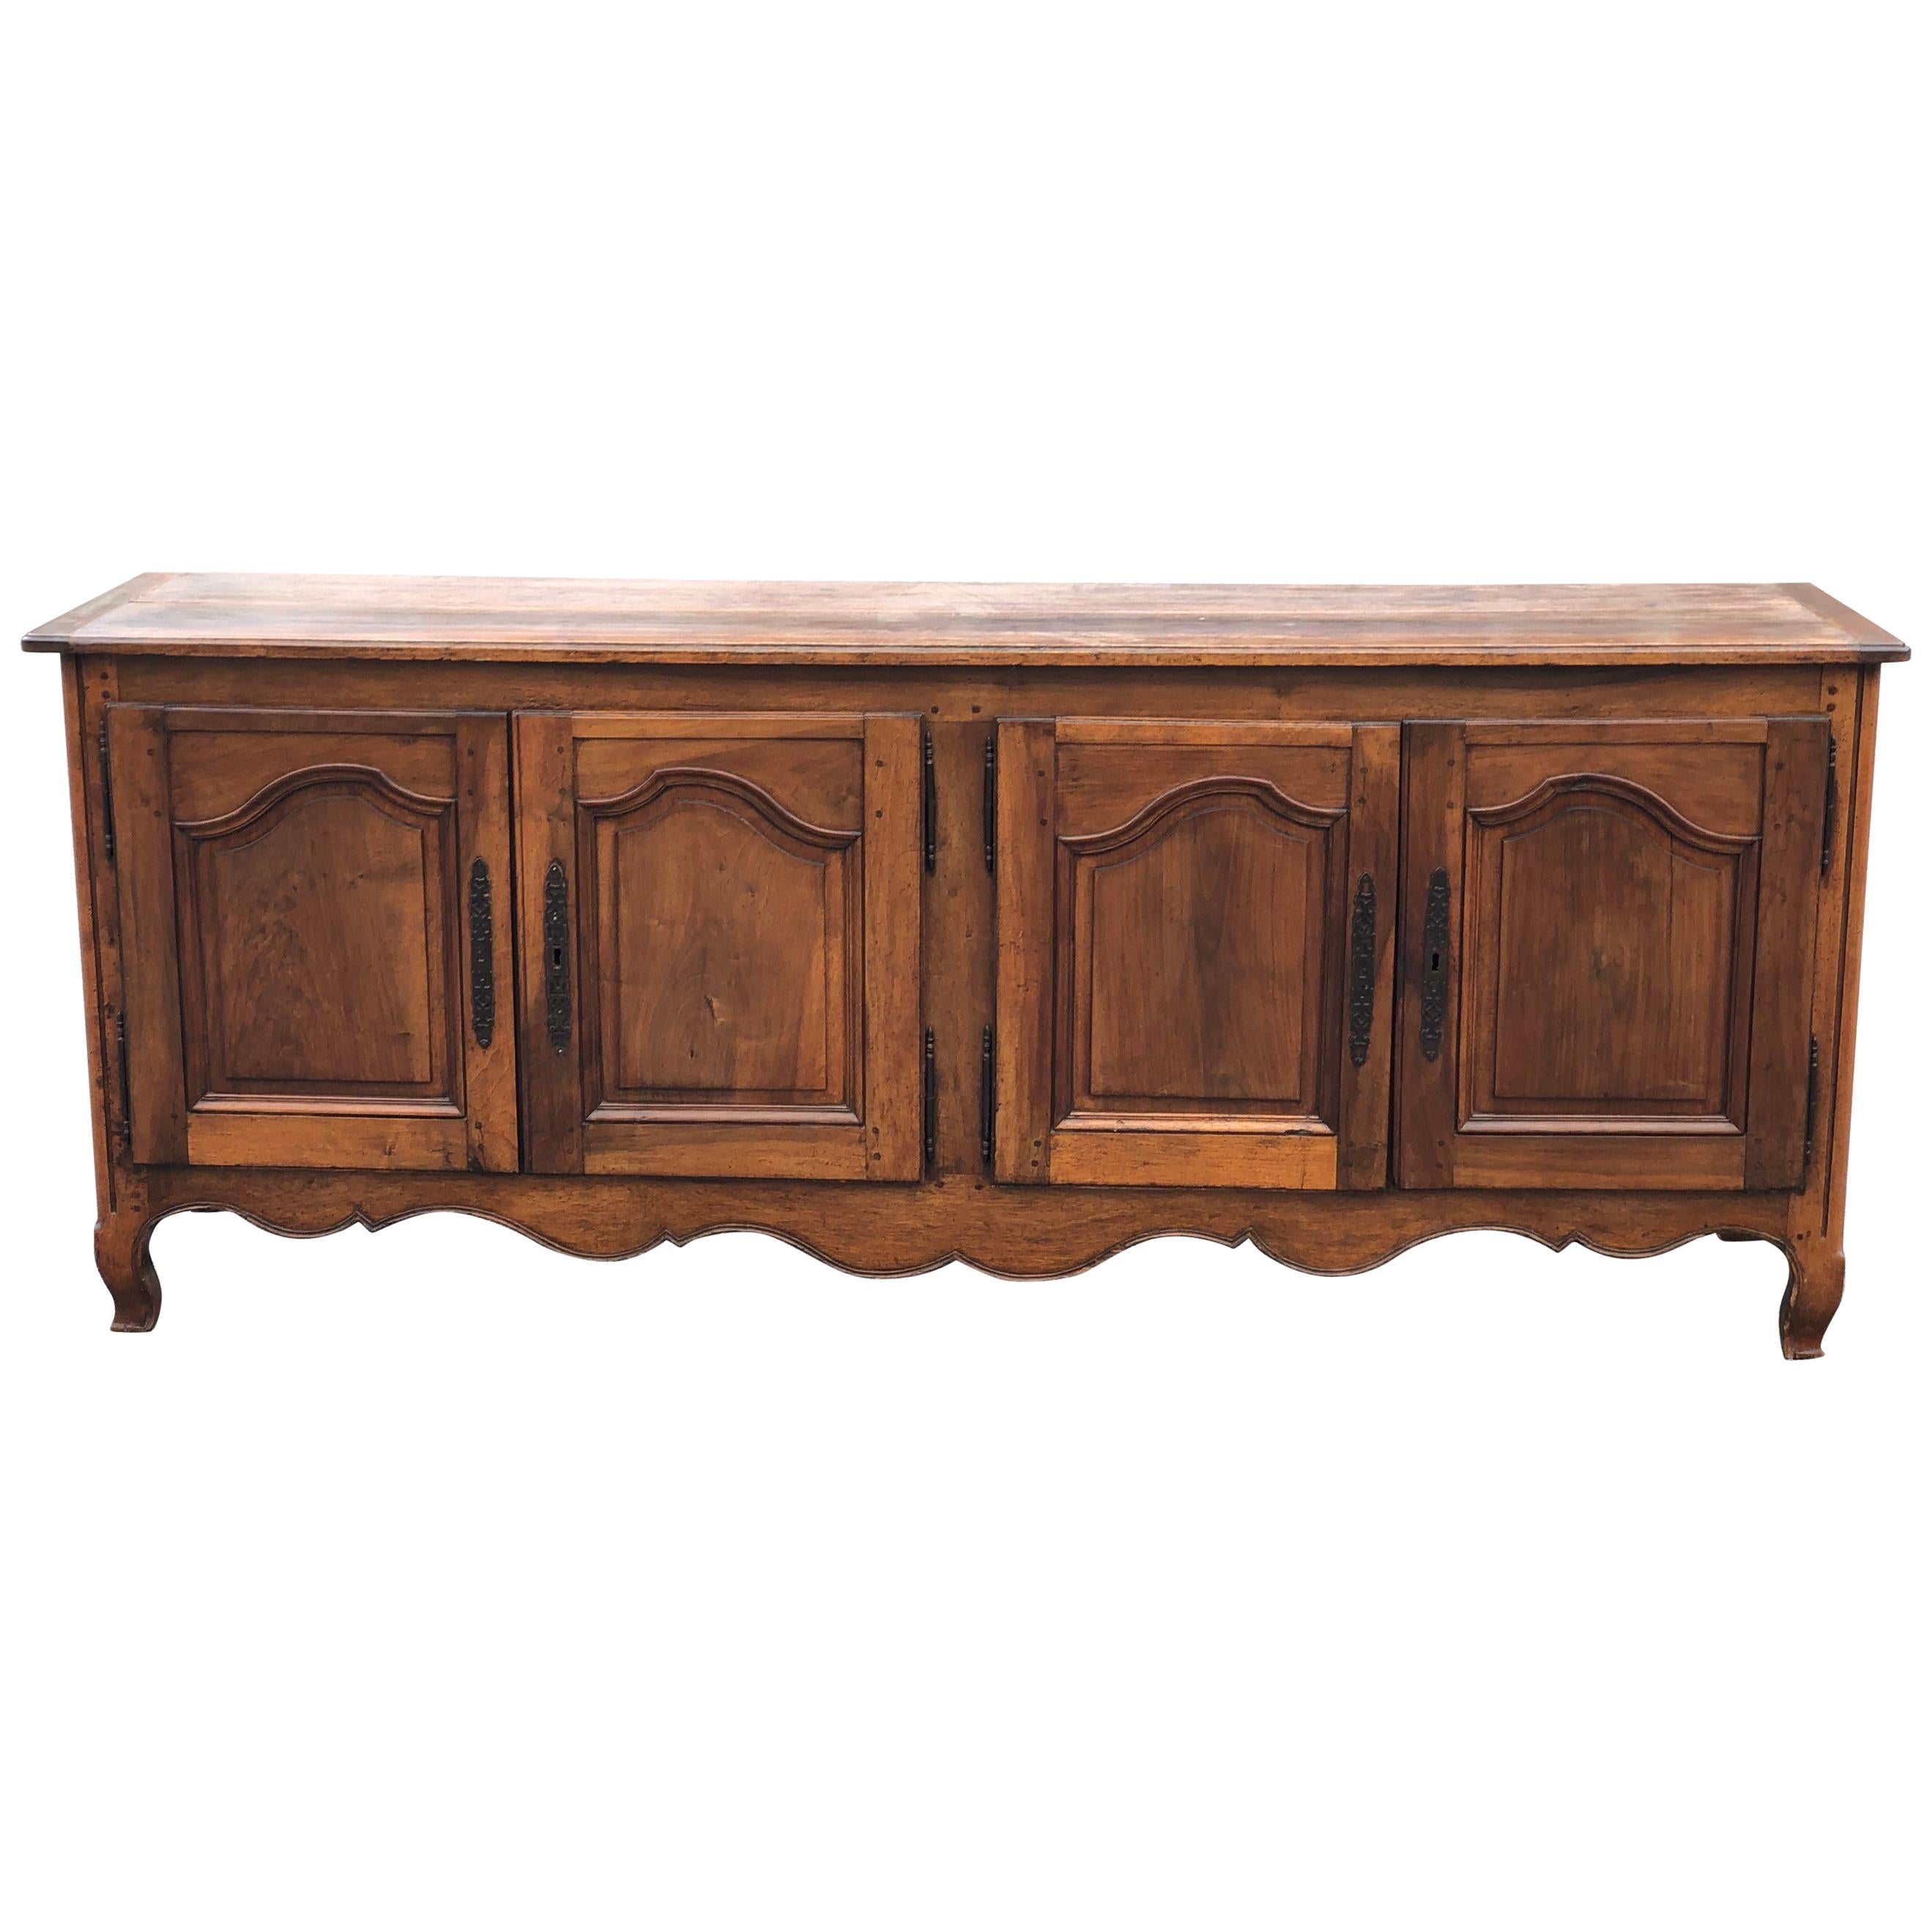 18th-19th Century Walnut and Cherry French Provincial 4-Door Enfilade